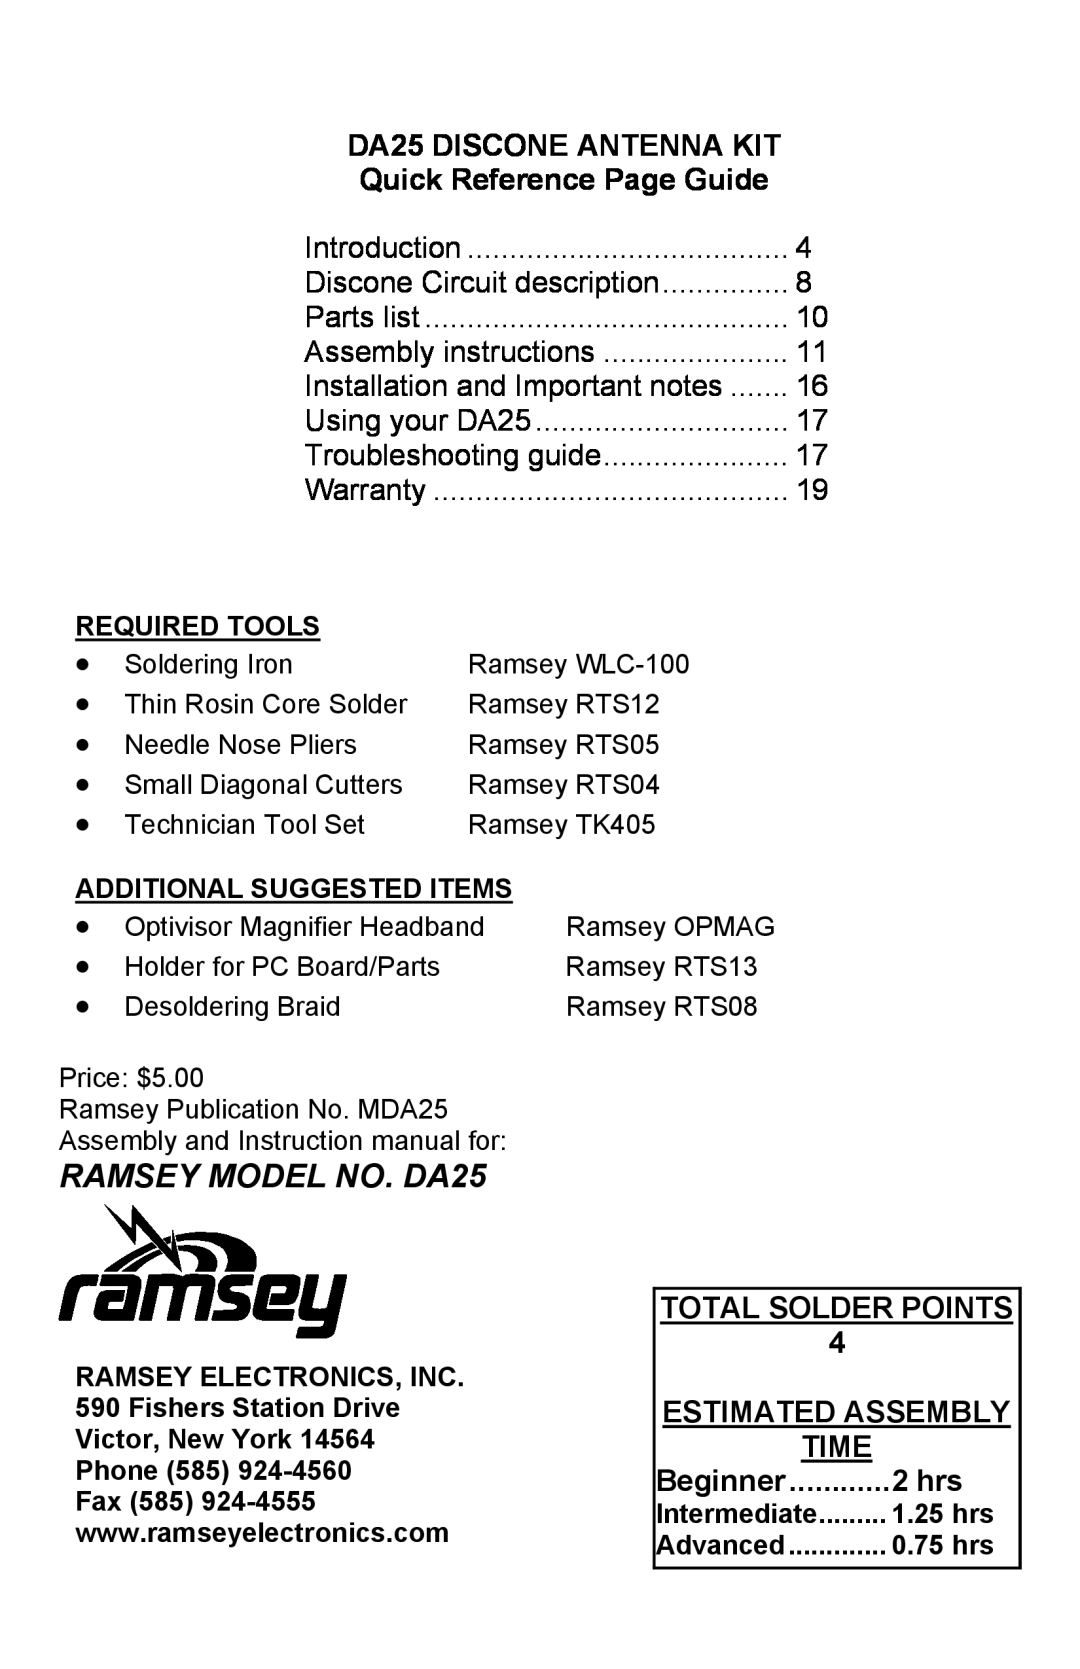 Ramsey Electronics manual RAMSEY MODEL NO. DA25, DA25 DISCONE ANTENNA KIT, Quick Reference Page Guide, Time, 2 hrs 